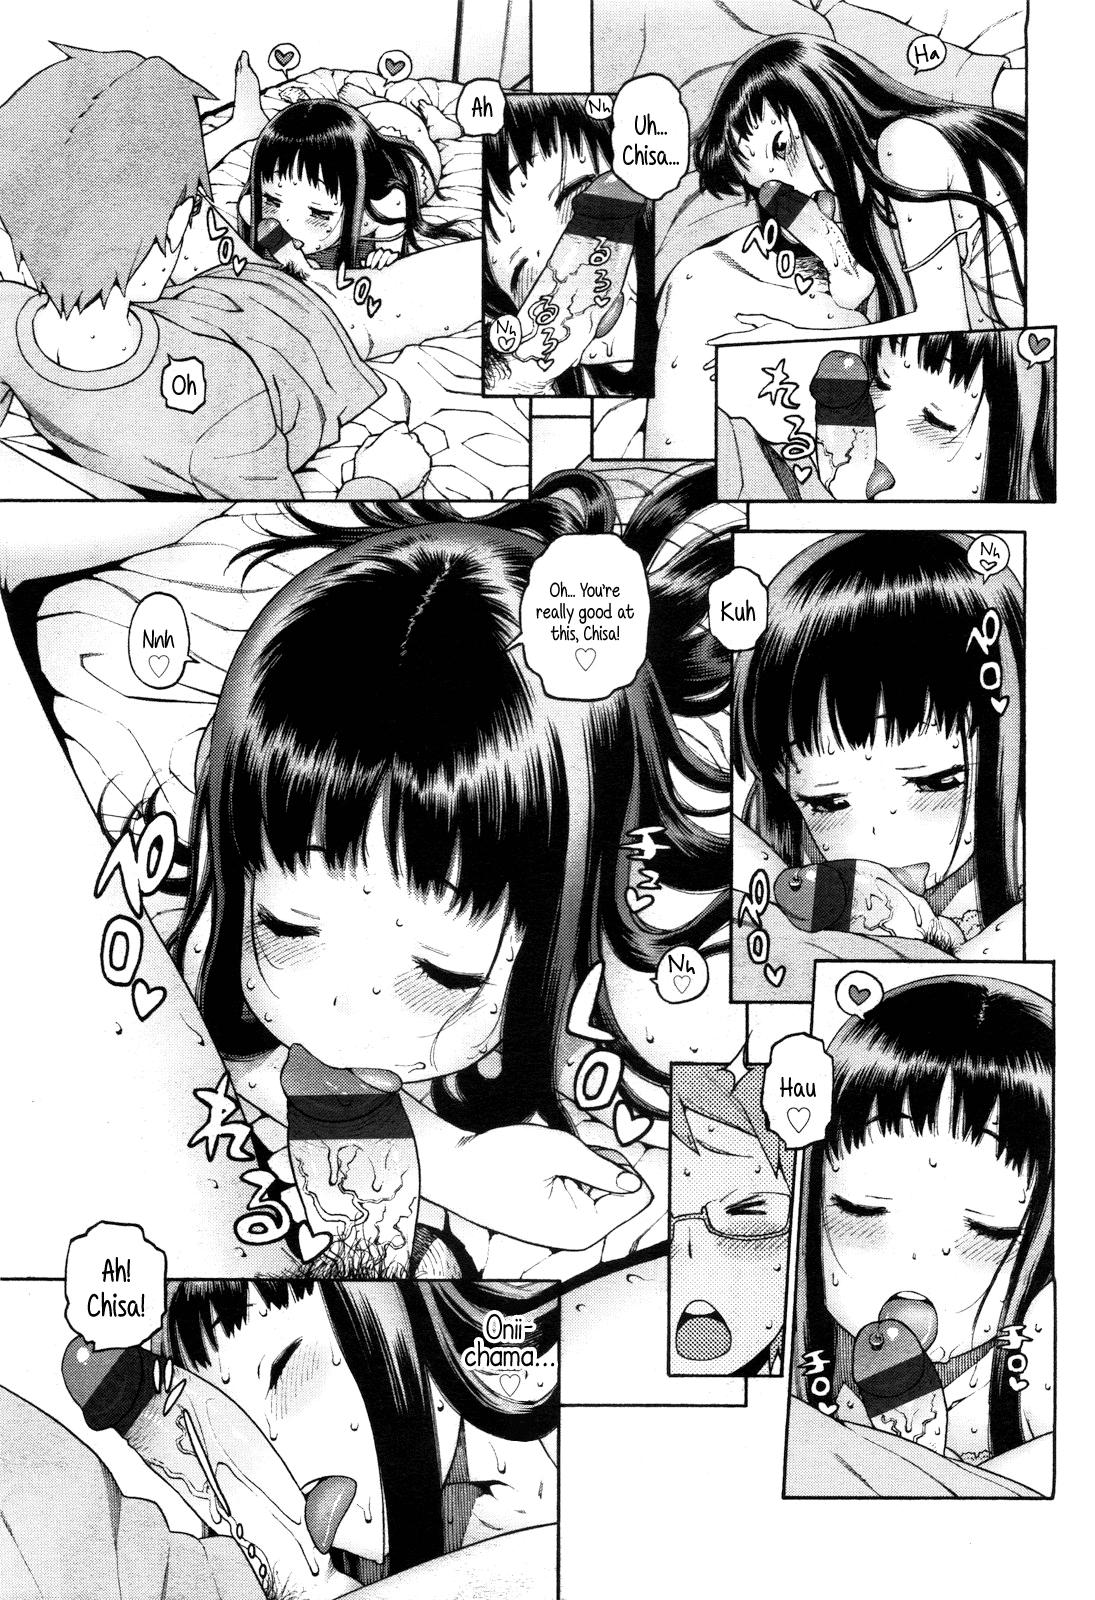 Pale Chisa to Oniichama | Chisa and Onii-chama Stripping - Page 11